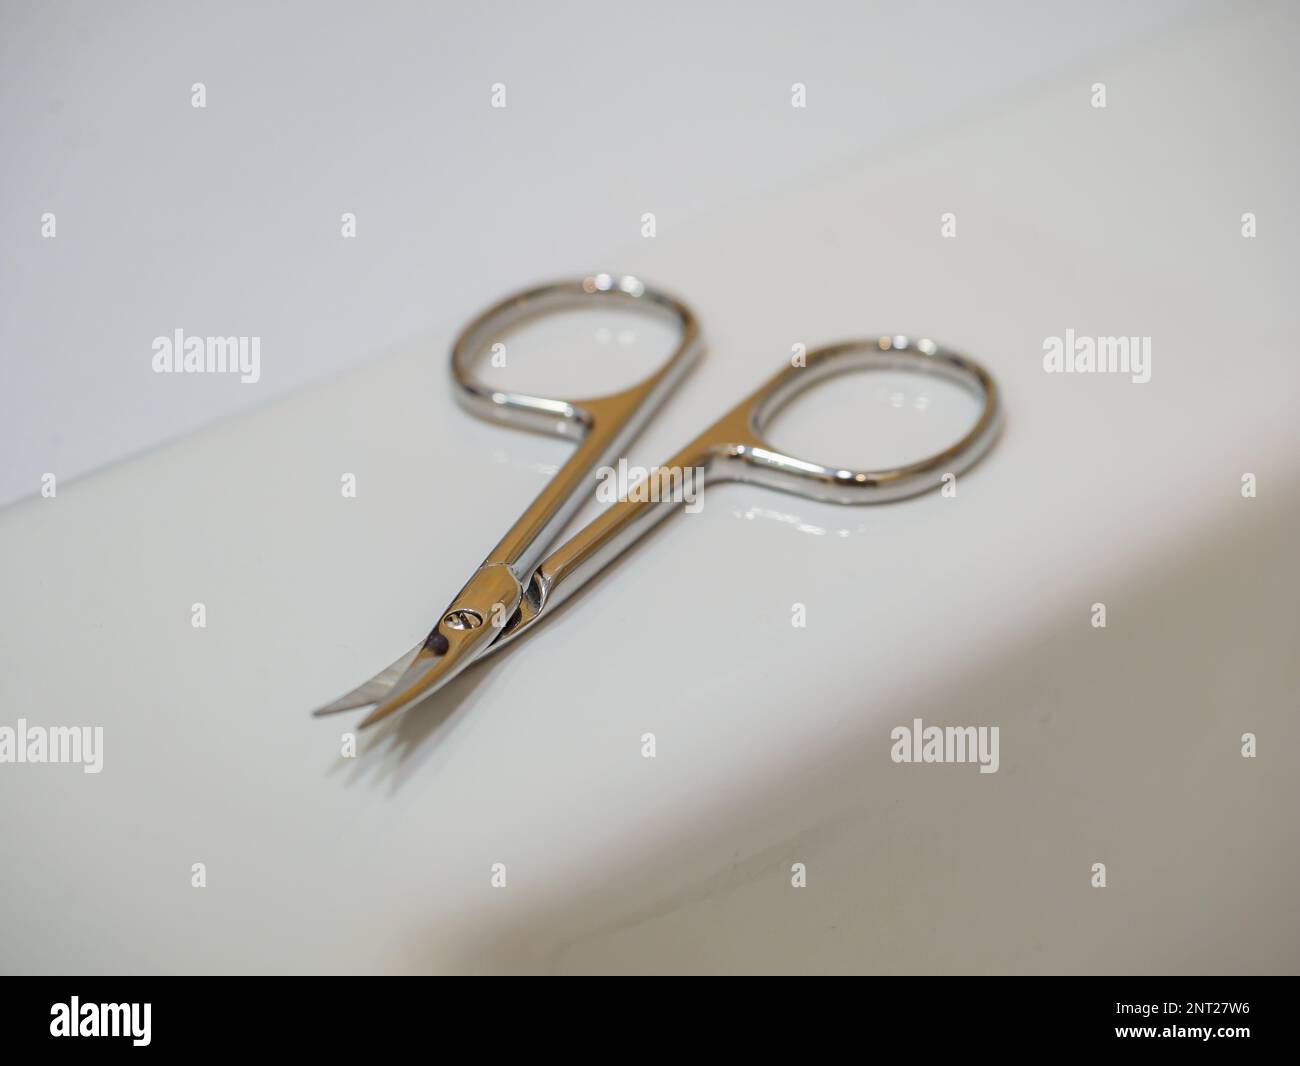 Manicure scissors for nails on a white background. Stock Photo